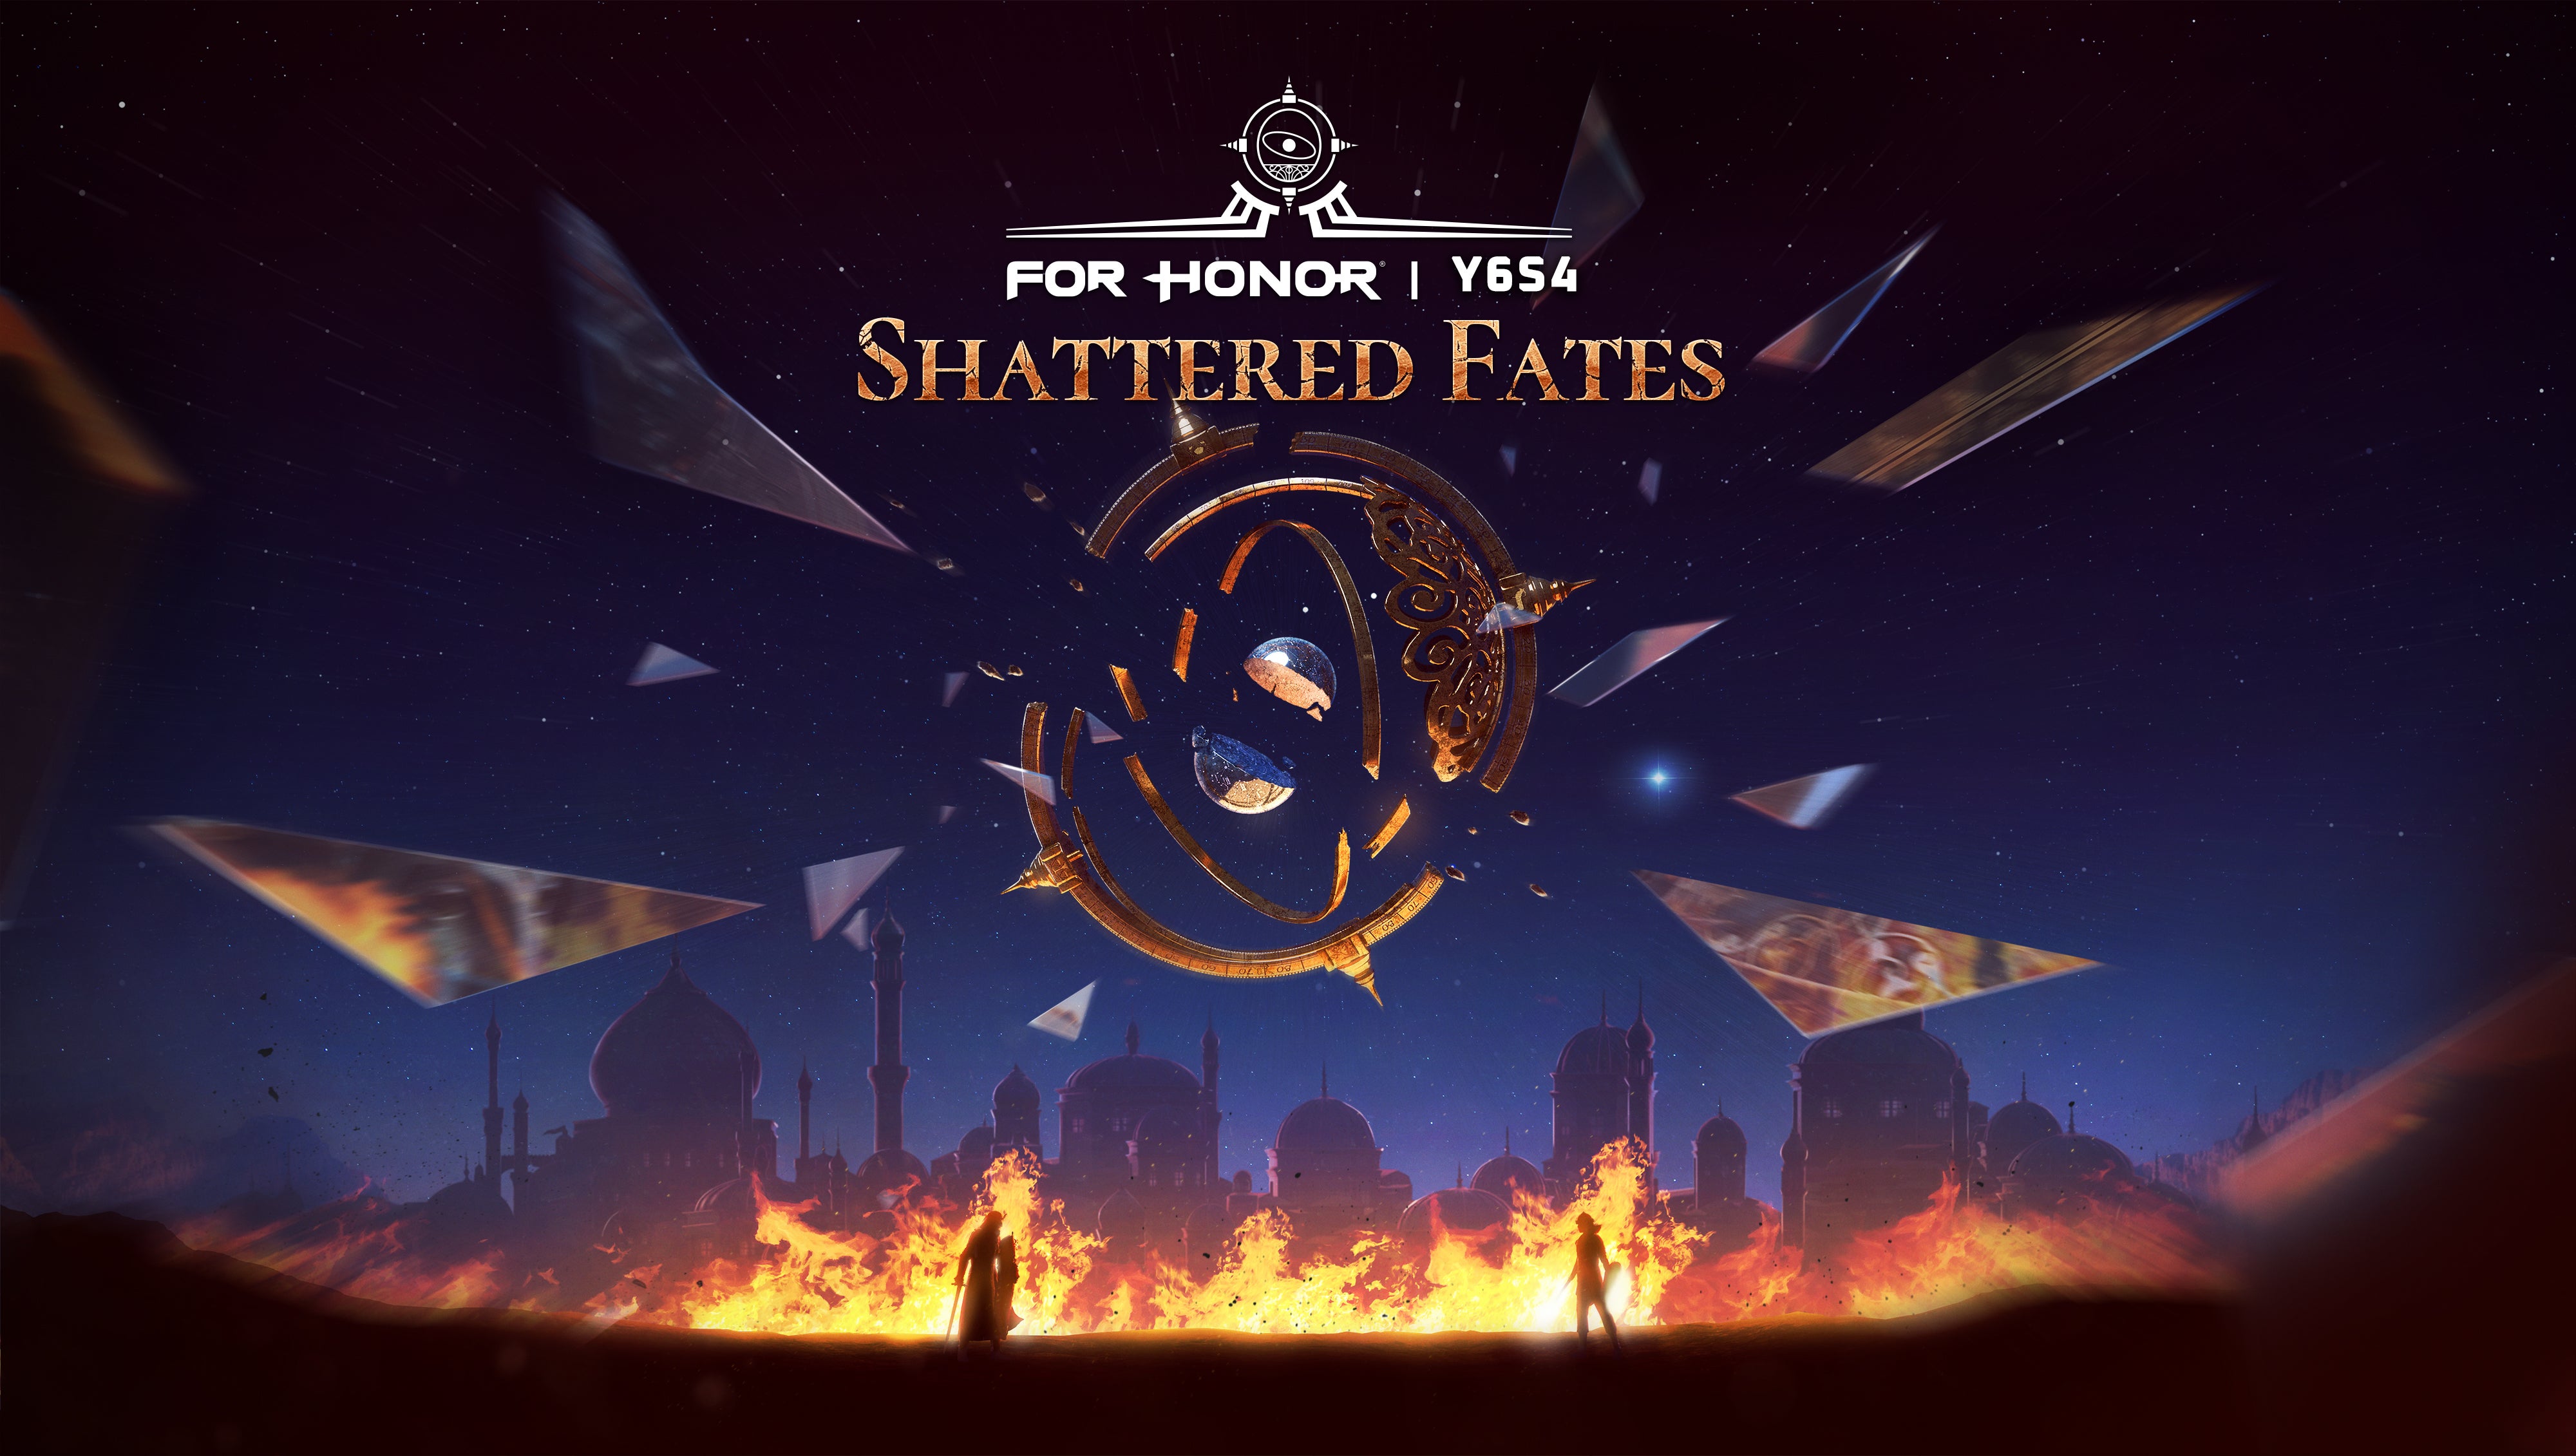 Image for For Honor's Year 6 Season 4, Shattered Fates, launches next week